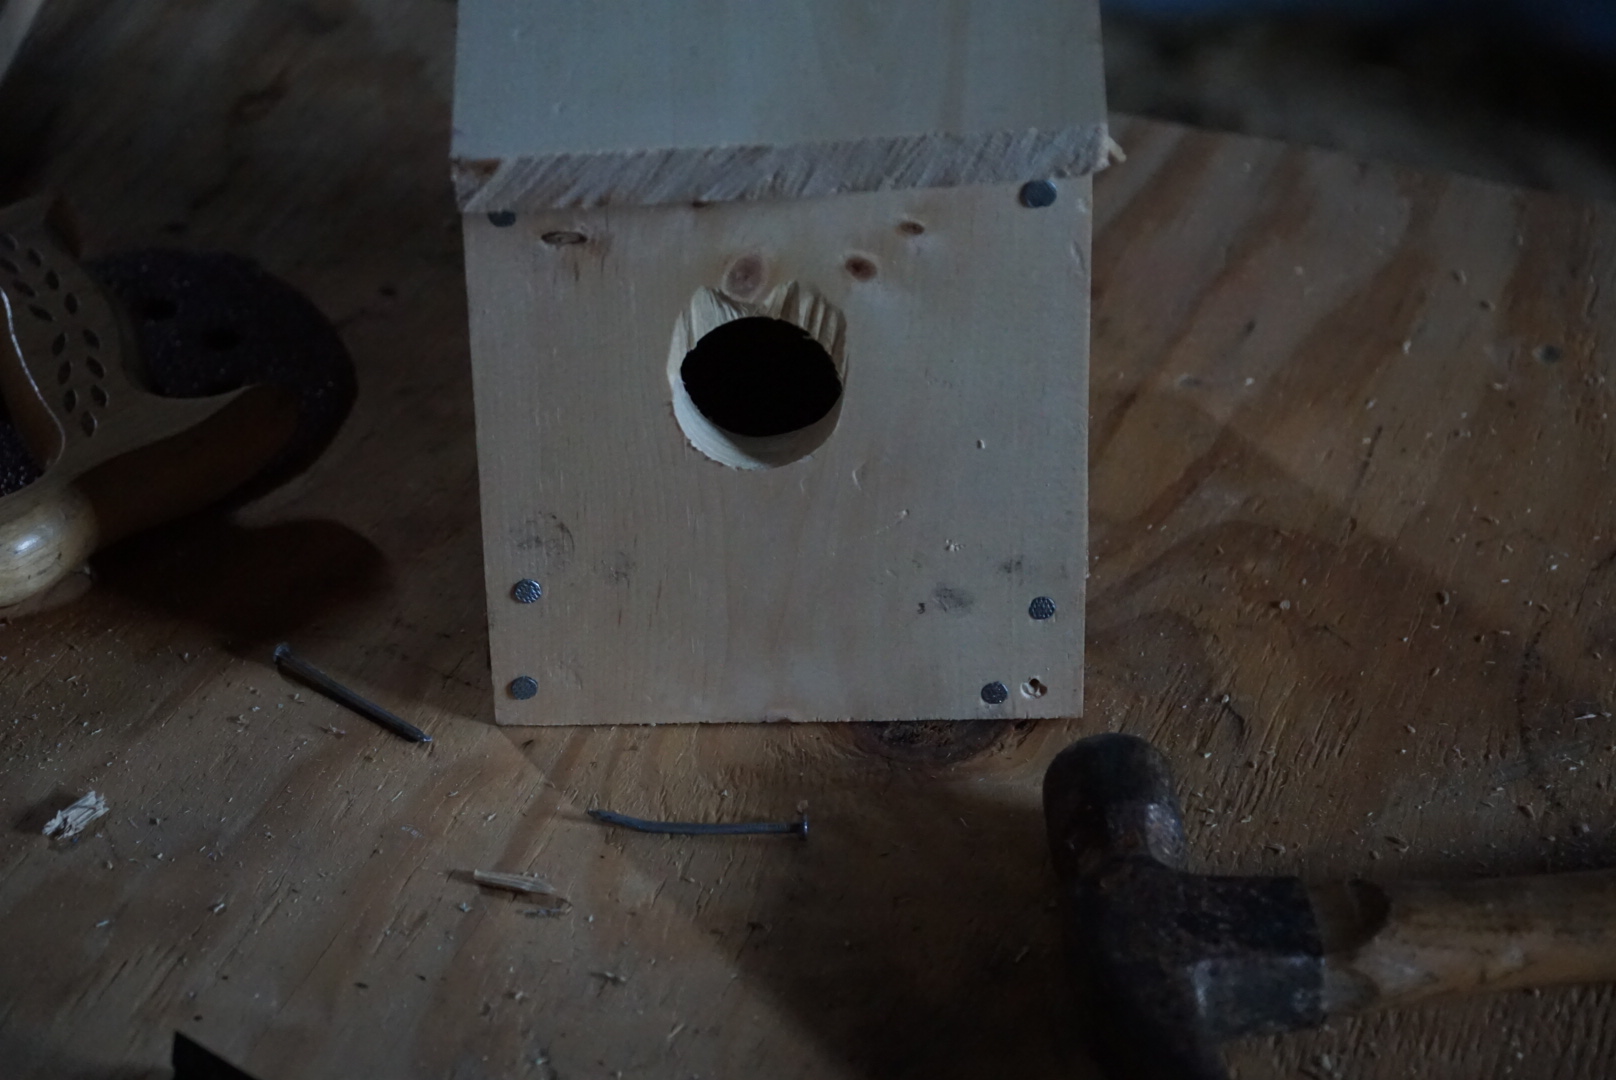 An image of a wooden birdhouse that is sitting on a wooden table. The table also has a saw, building nails and a hammer on it.